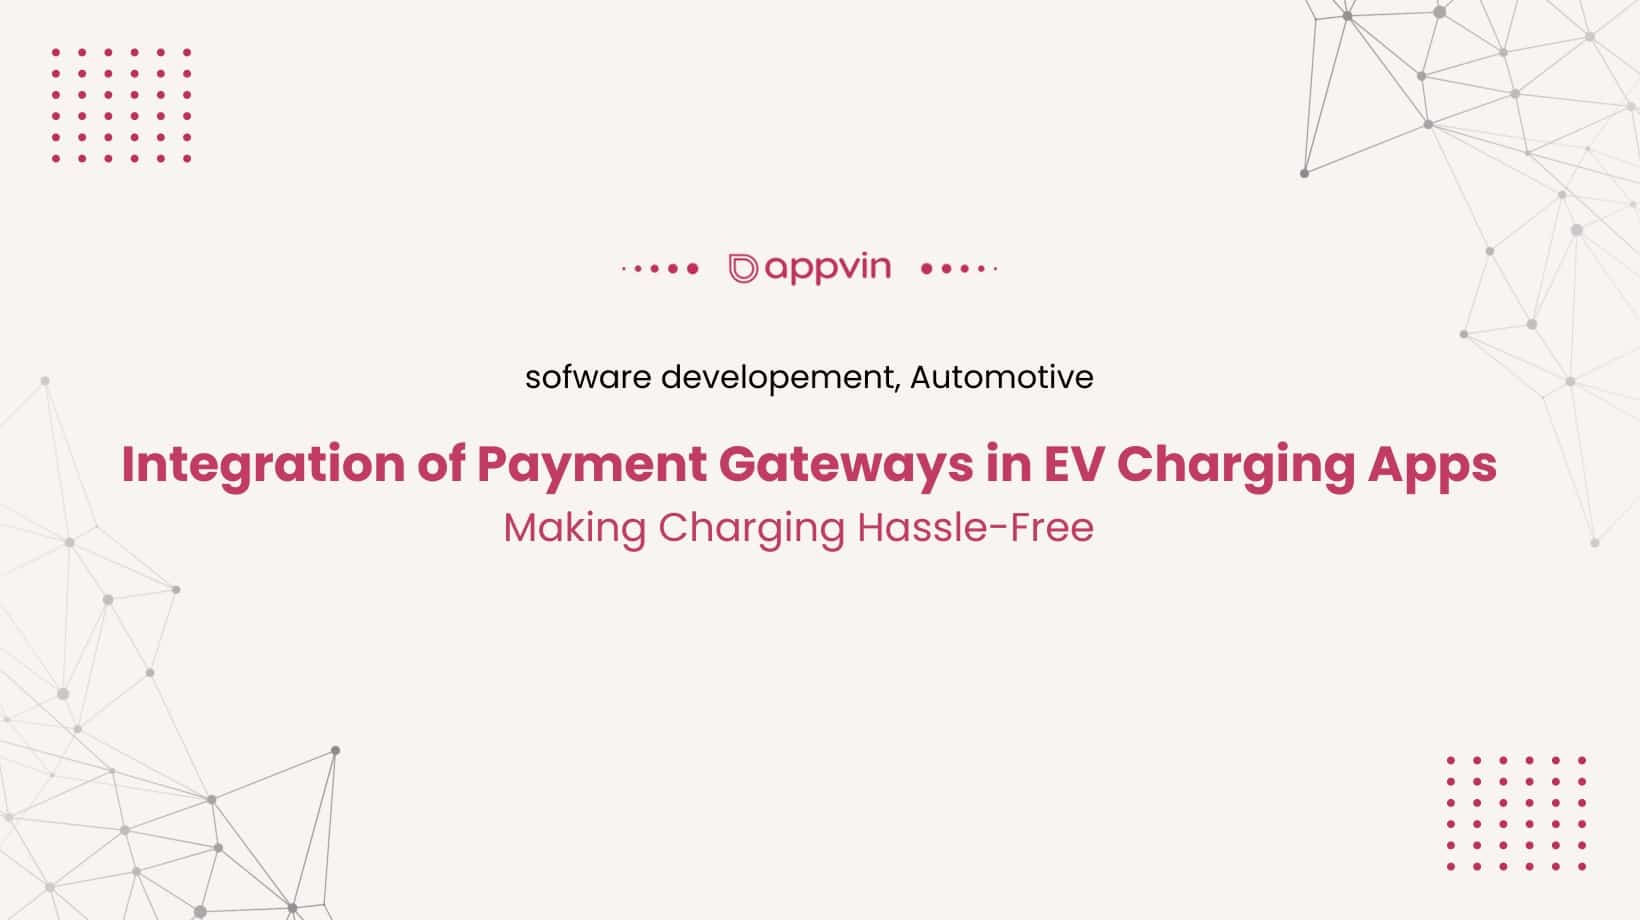 Integration of Payment Gateways in EV Charging Apps: Making Charging Hassle-Free